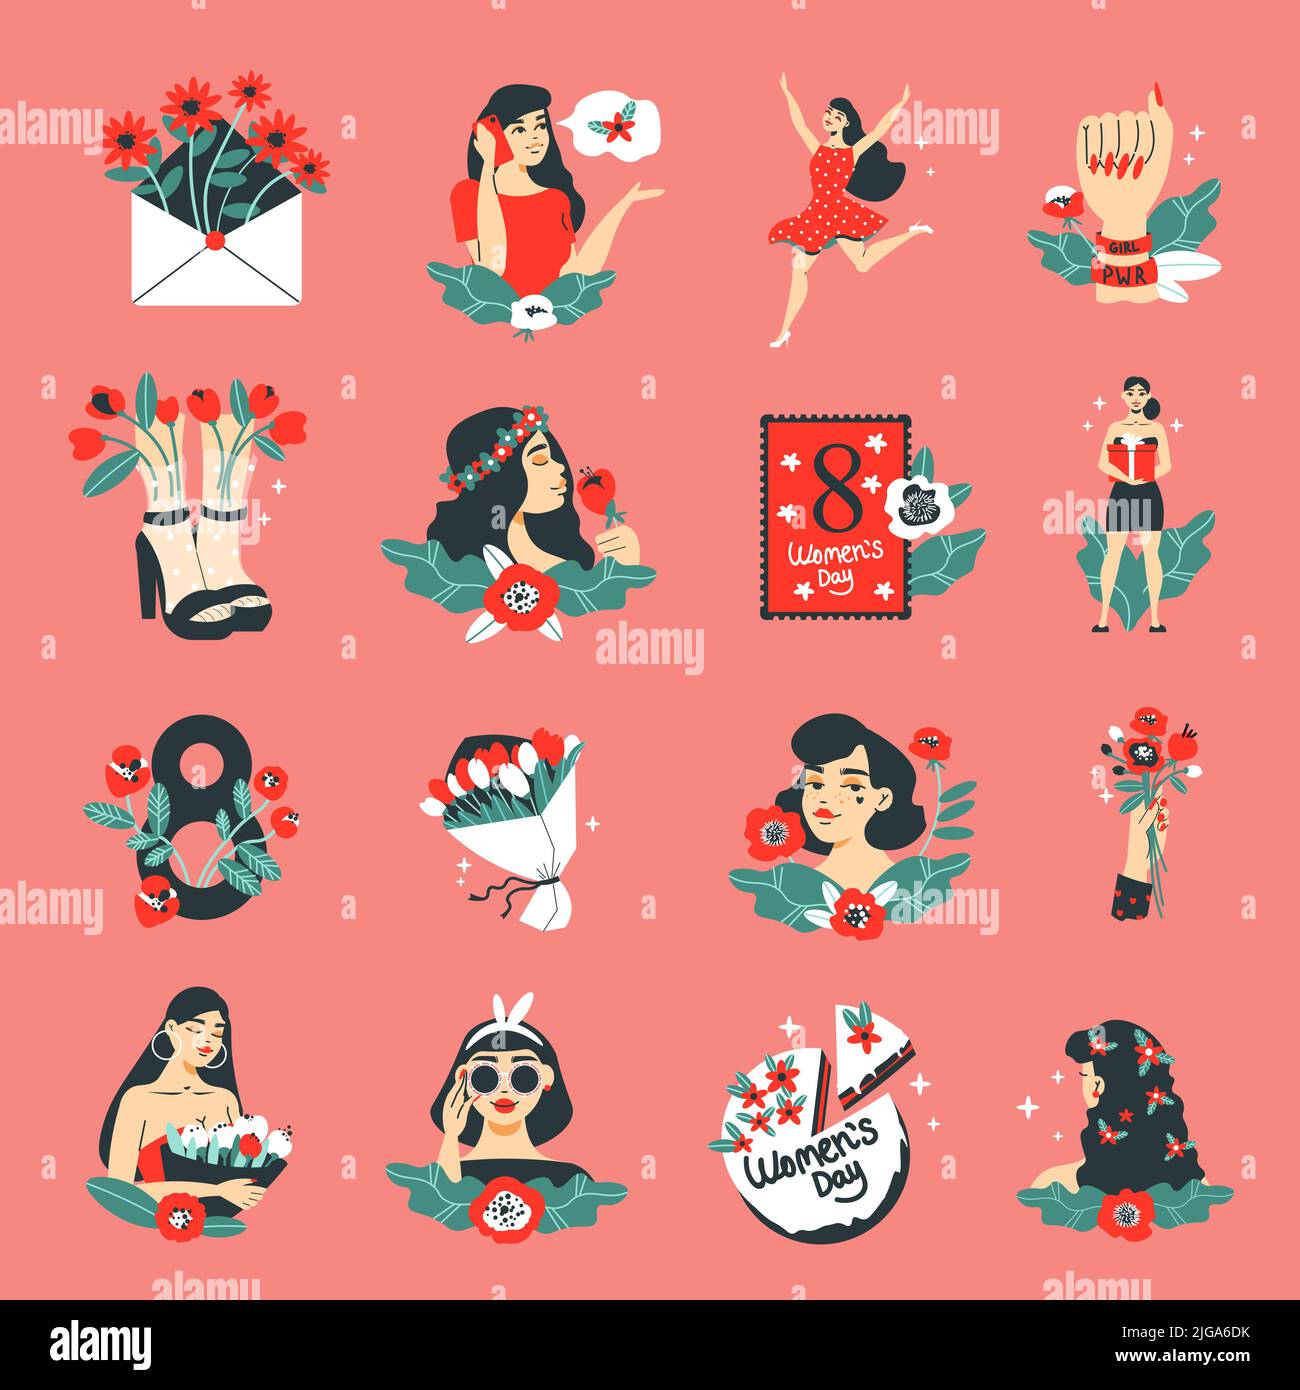 International womens day color set of isolated icons female characters images of flowers cards and gifts vector illustration Stock Vector